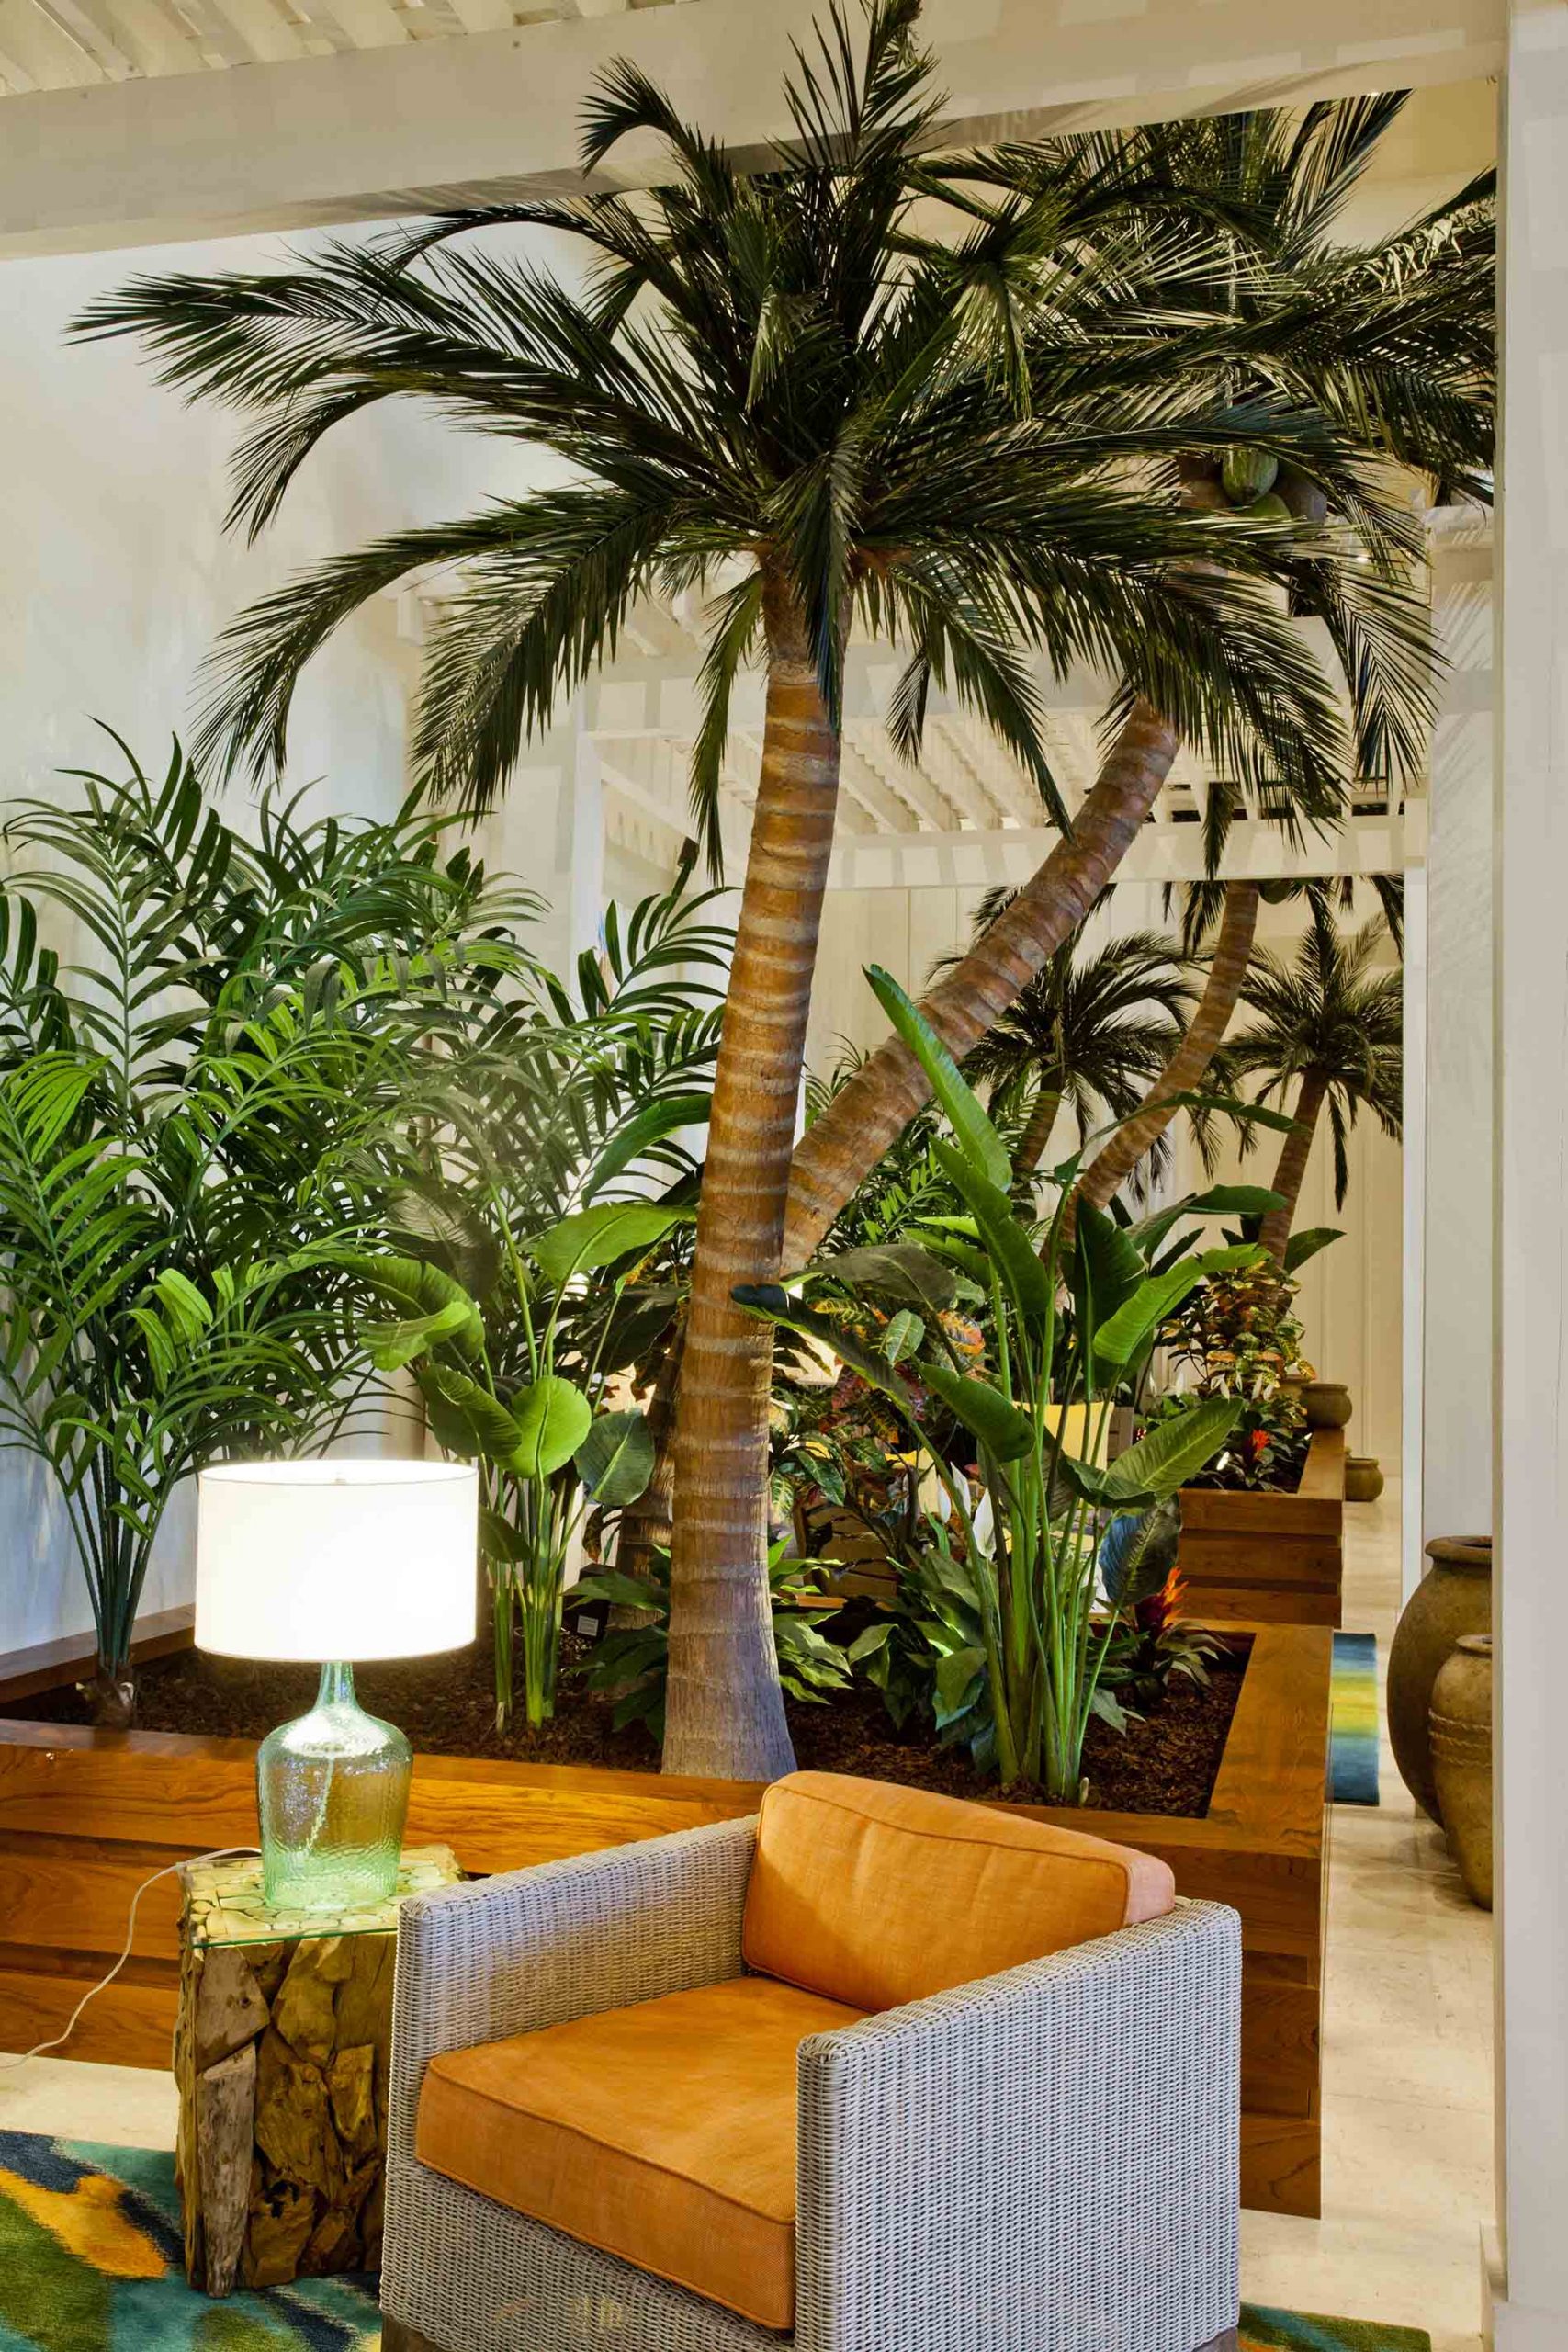 Fabricated Palm Trees and Plants at Margaritaville lounge